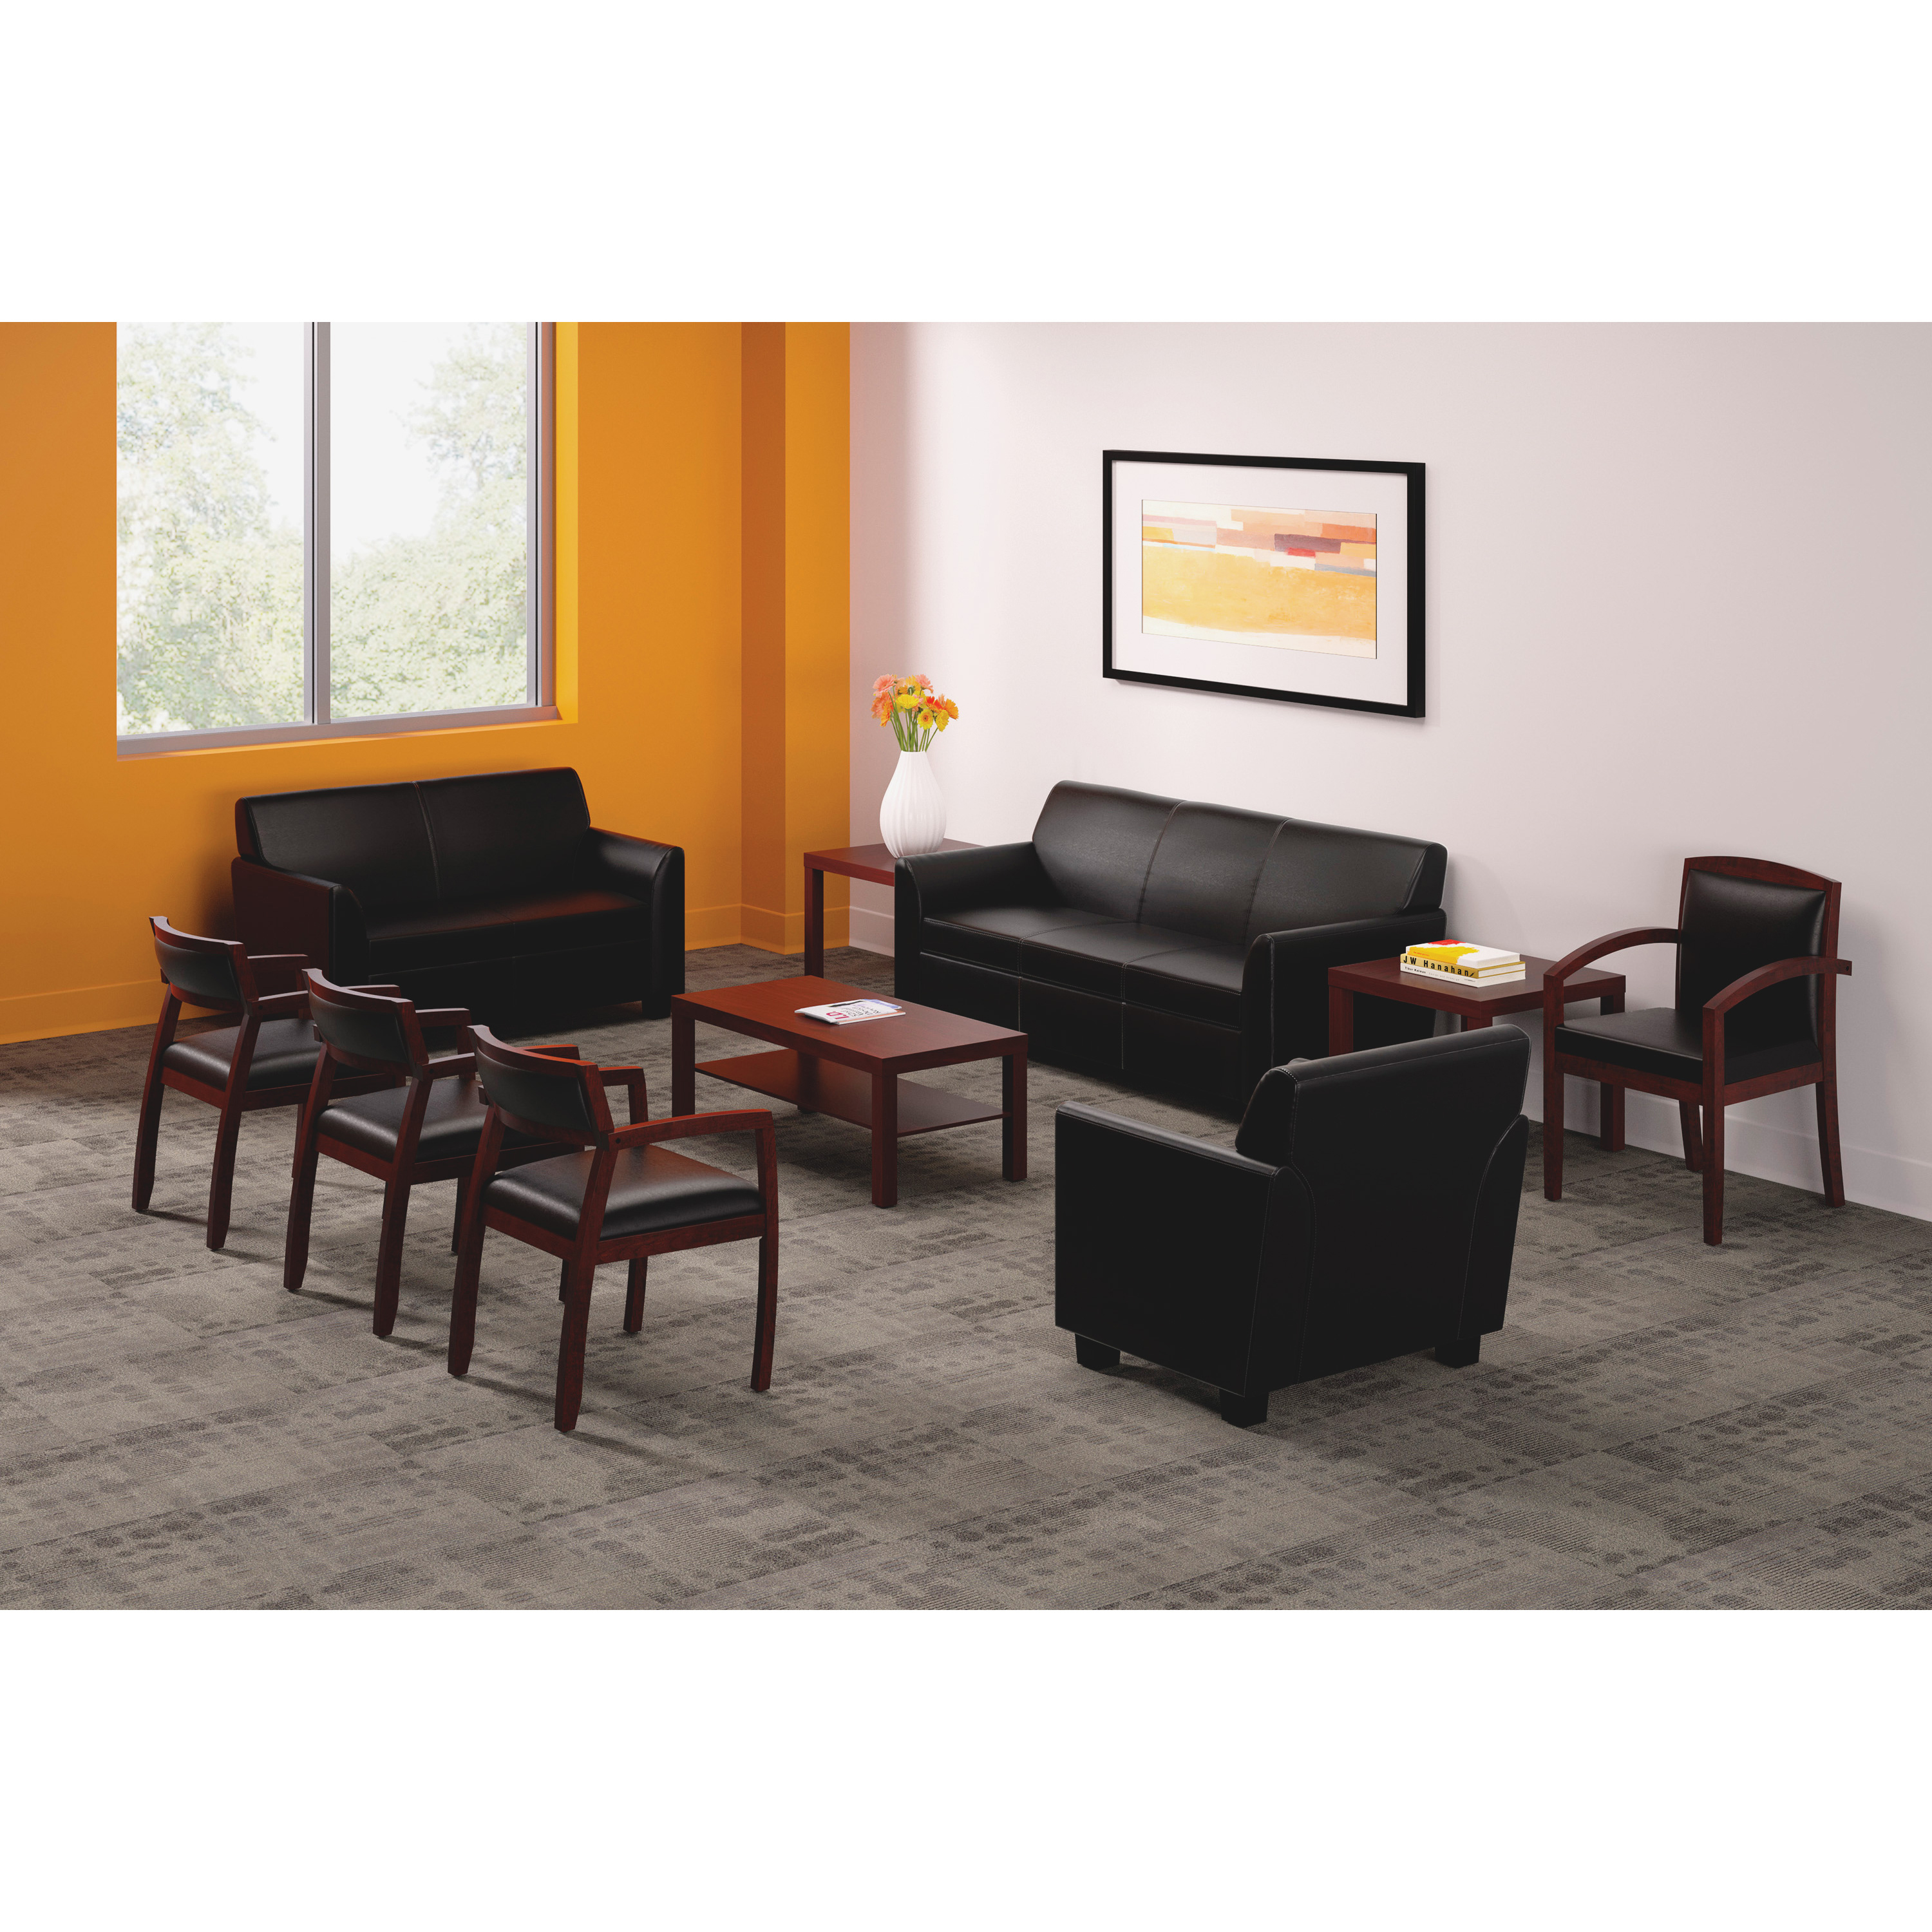 basyx VL850 Series Wood Guest Reception Waiting Room Chair, Black Leather Upholstery w/Mahogany Veneer - image 4 of 5